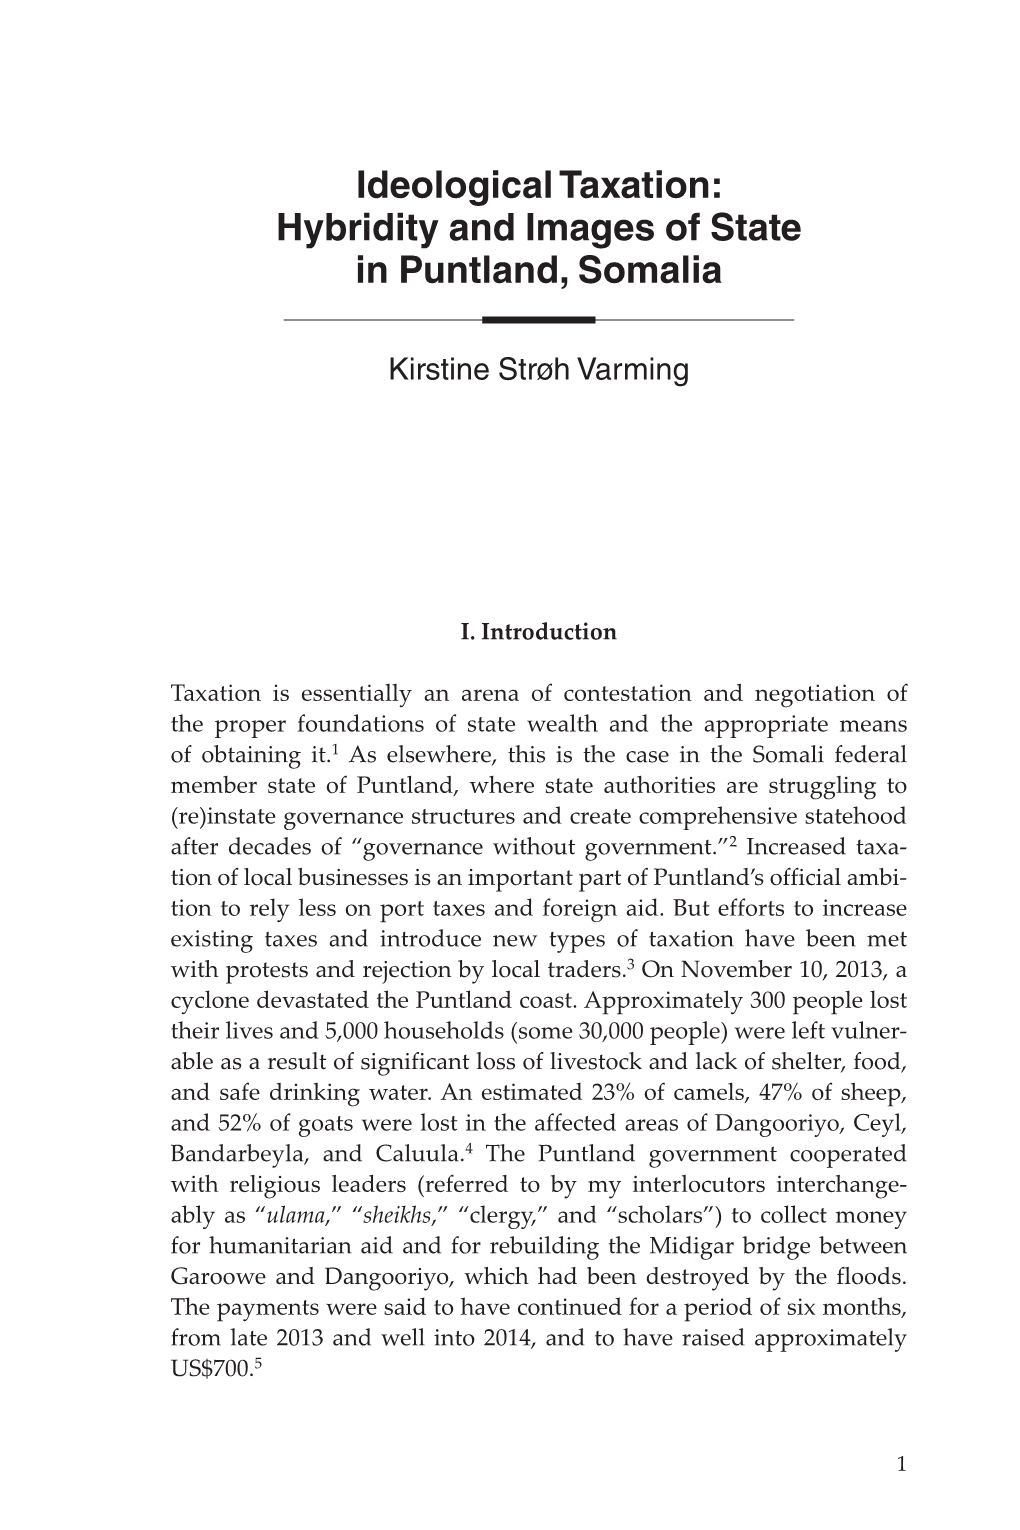 Ideological Taxation: Hybridity and Images of State in Puntland, Somalia